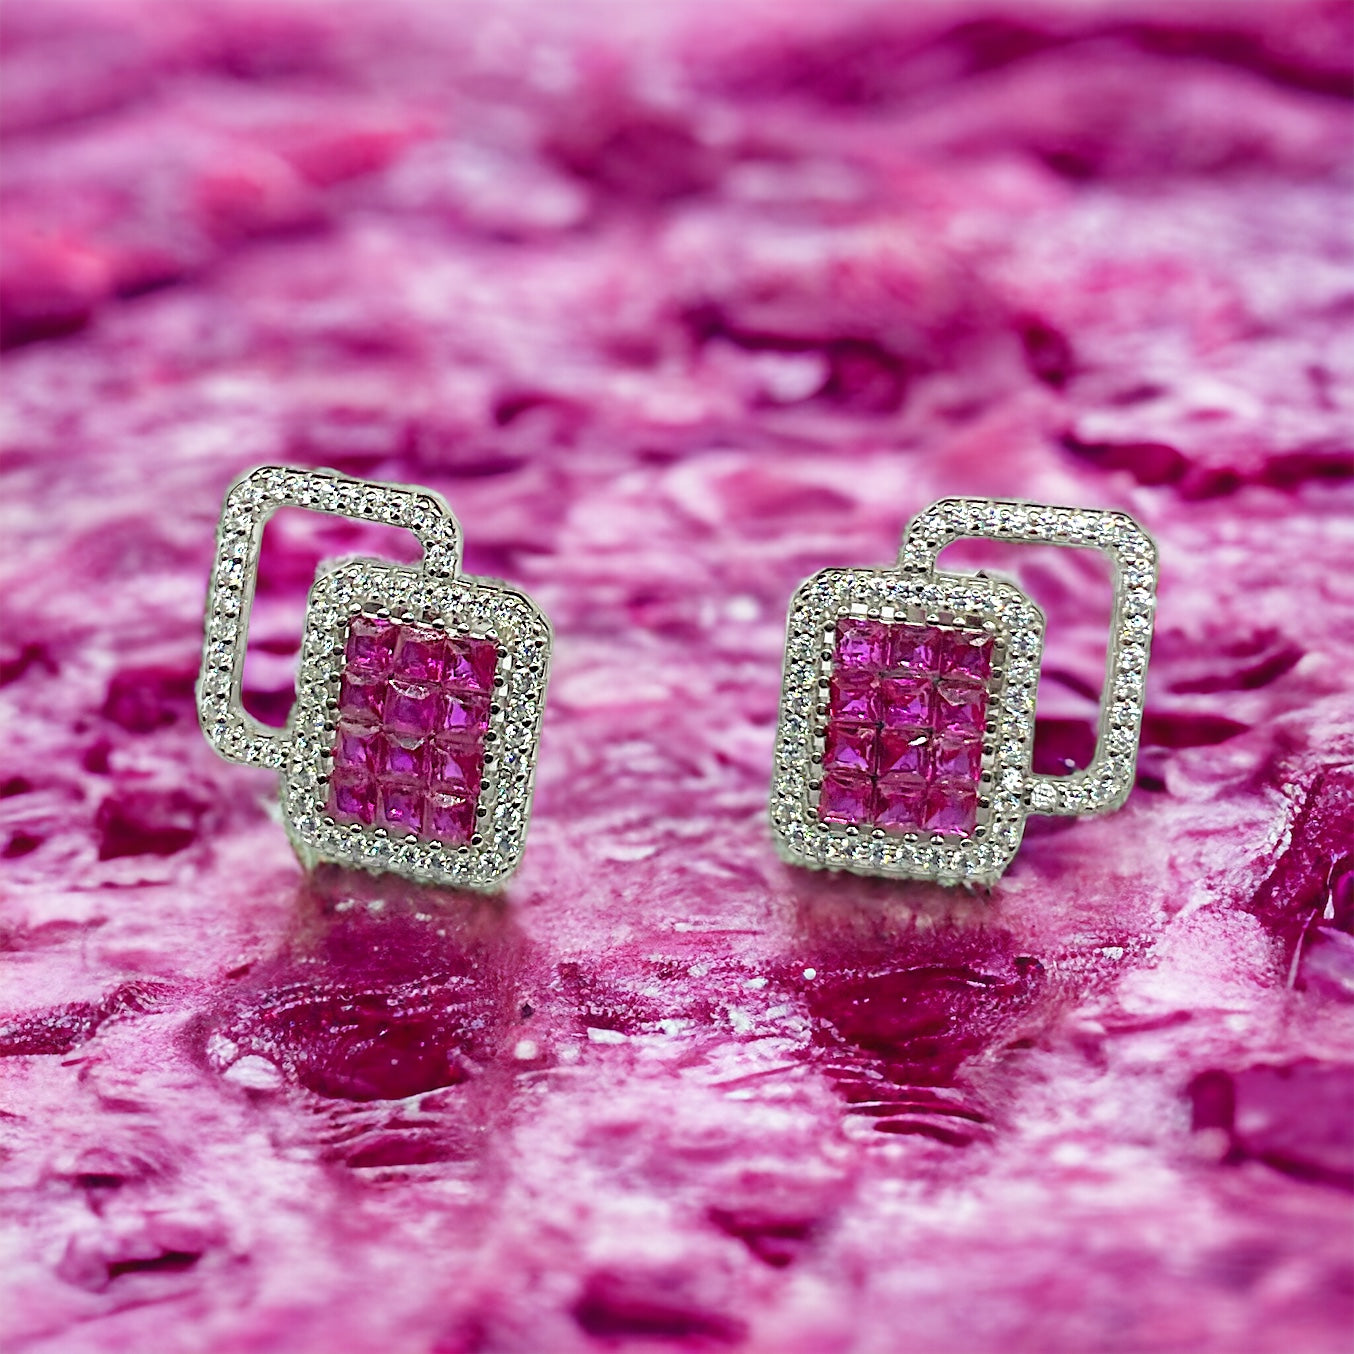 a pair of pink and white diamond earrings